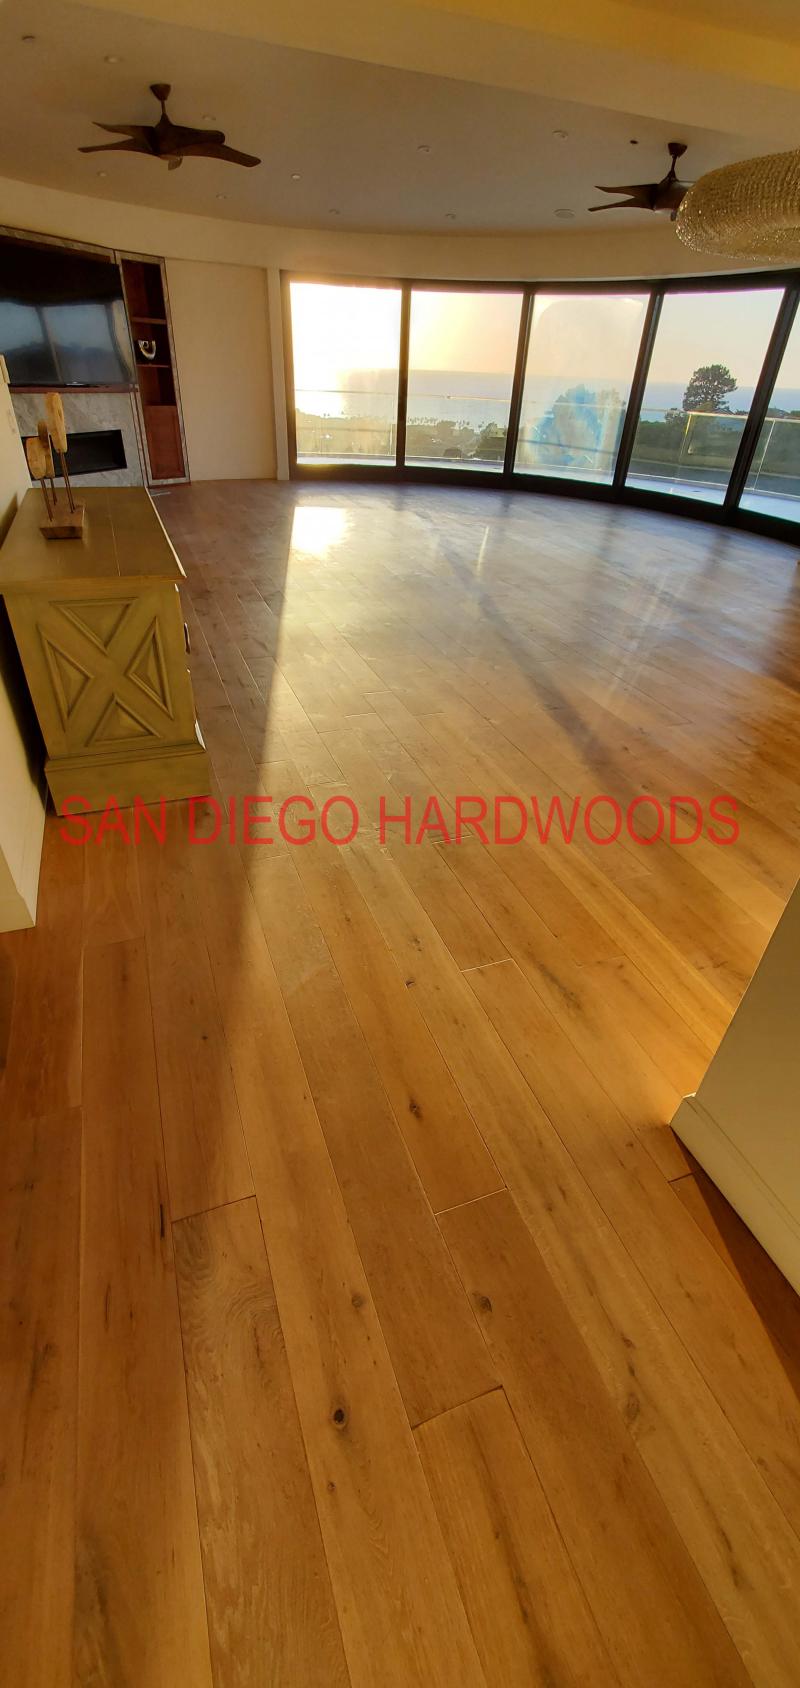 LA JOLLA WOOD FLOOR REFINISHING WITH DUST CONTAINMENT SYSTEM